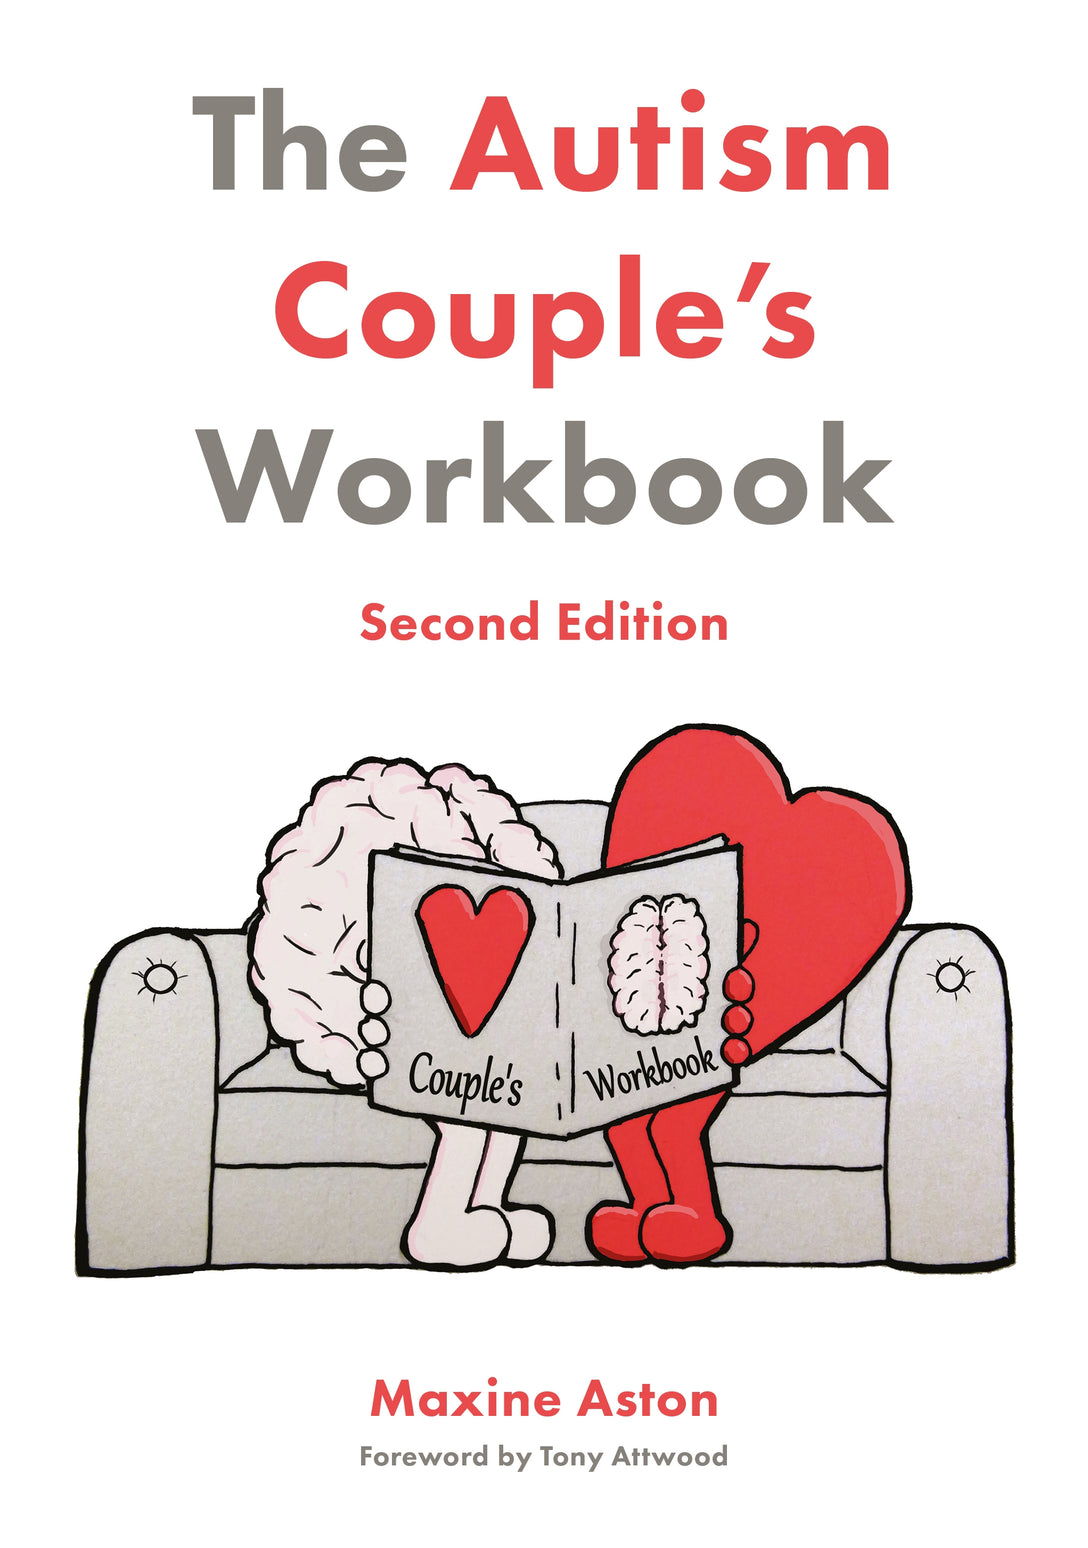 The Autism Couple's Workbook, Second Edition by Maxine Aston